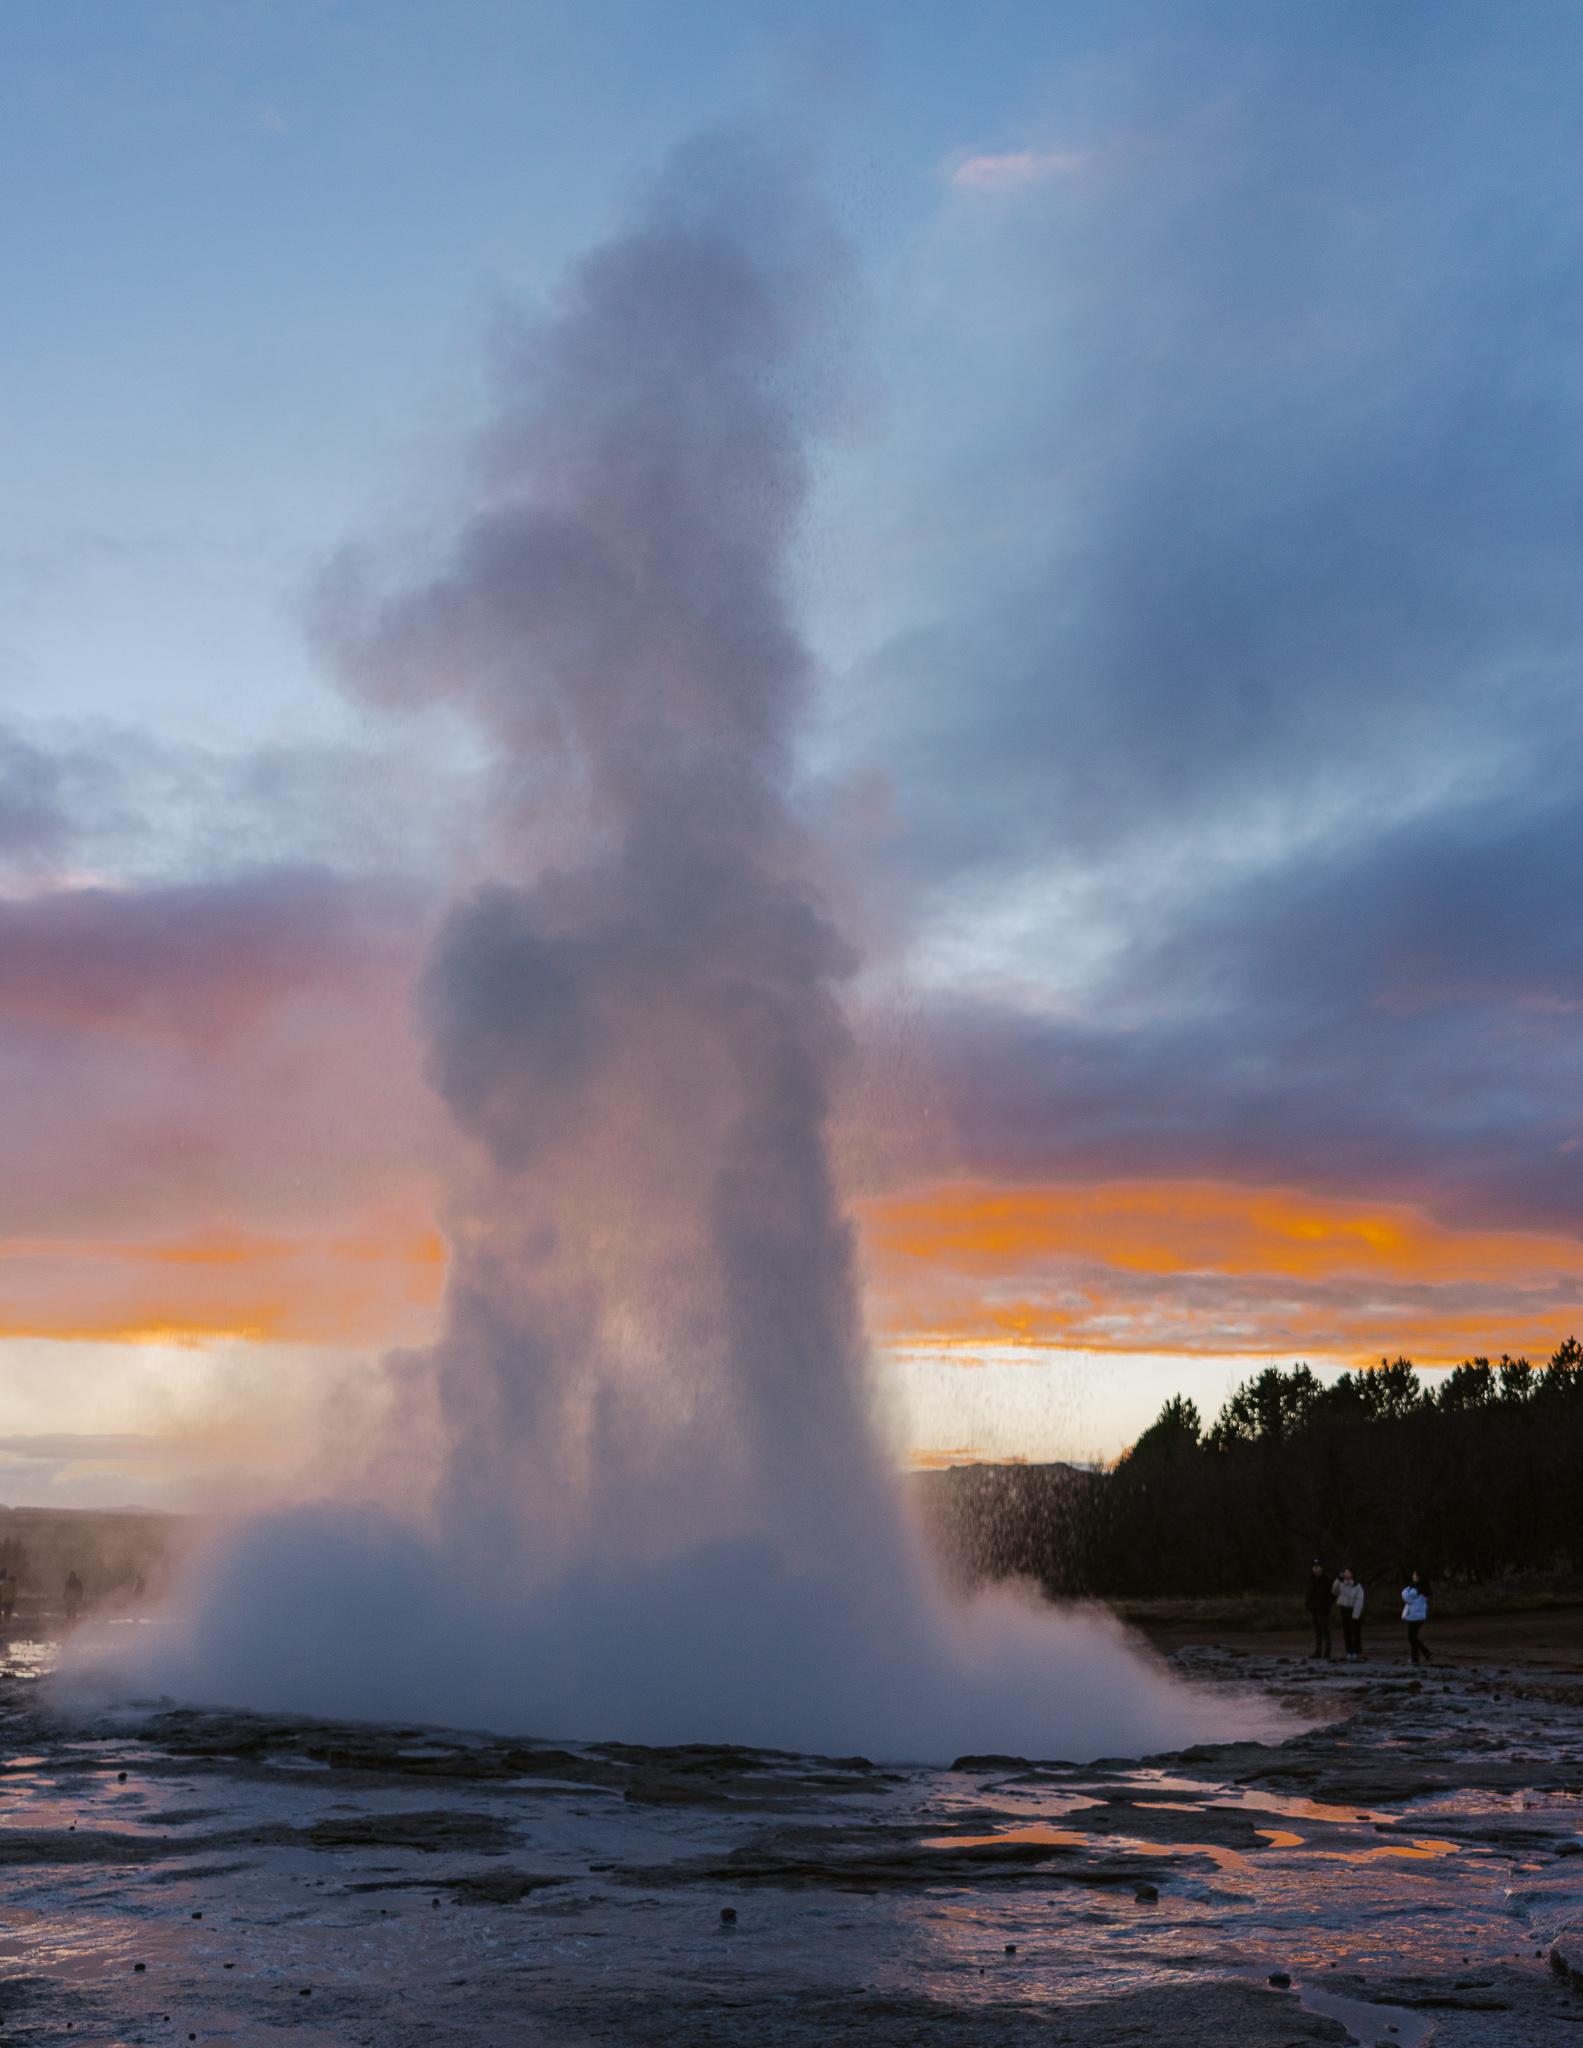 water spouting from Geysir in Iceland at sunset